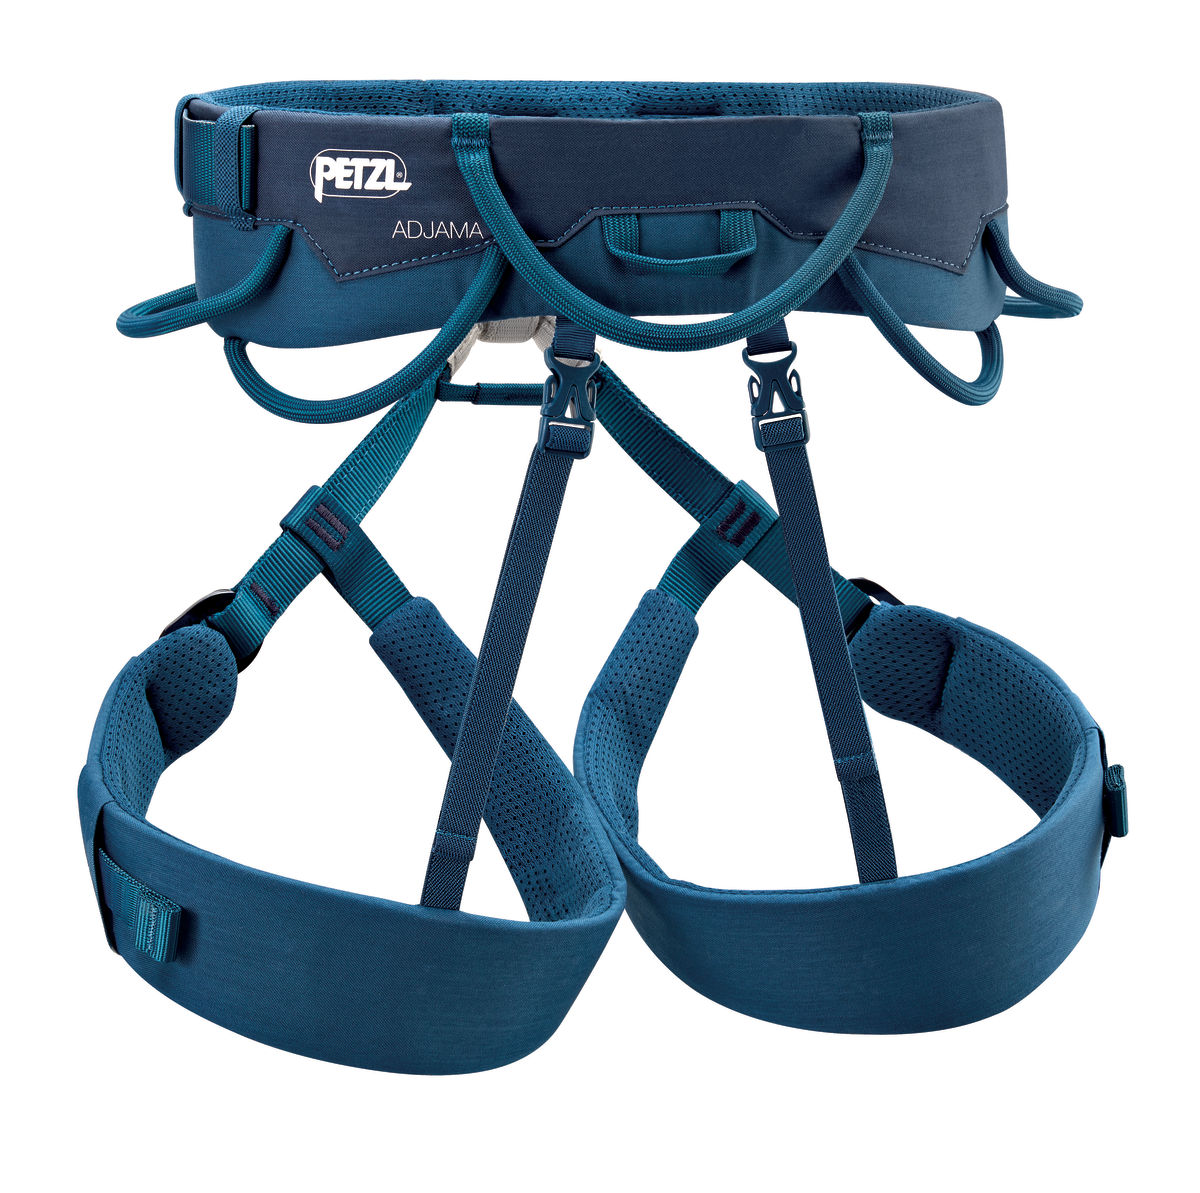 ADJAMA, Climbing and mountaineering harness with adjustable leg loops, for  single and multi-pitch climbing - Petzl Other